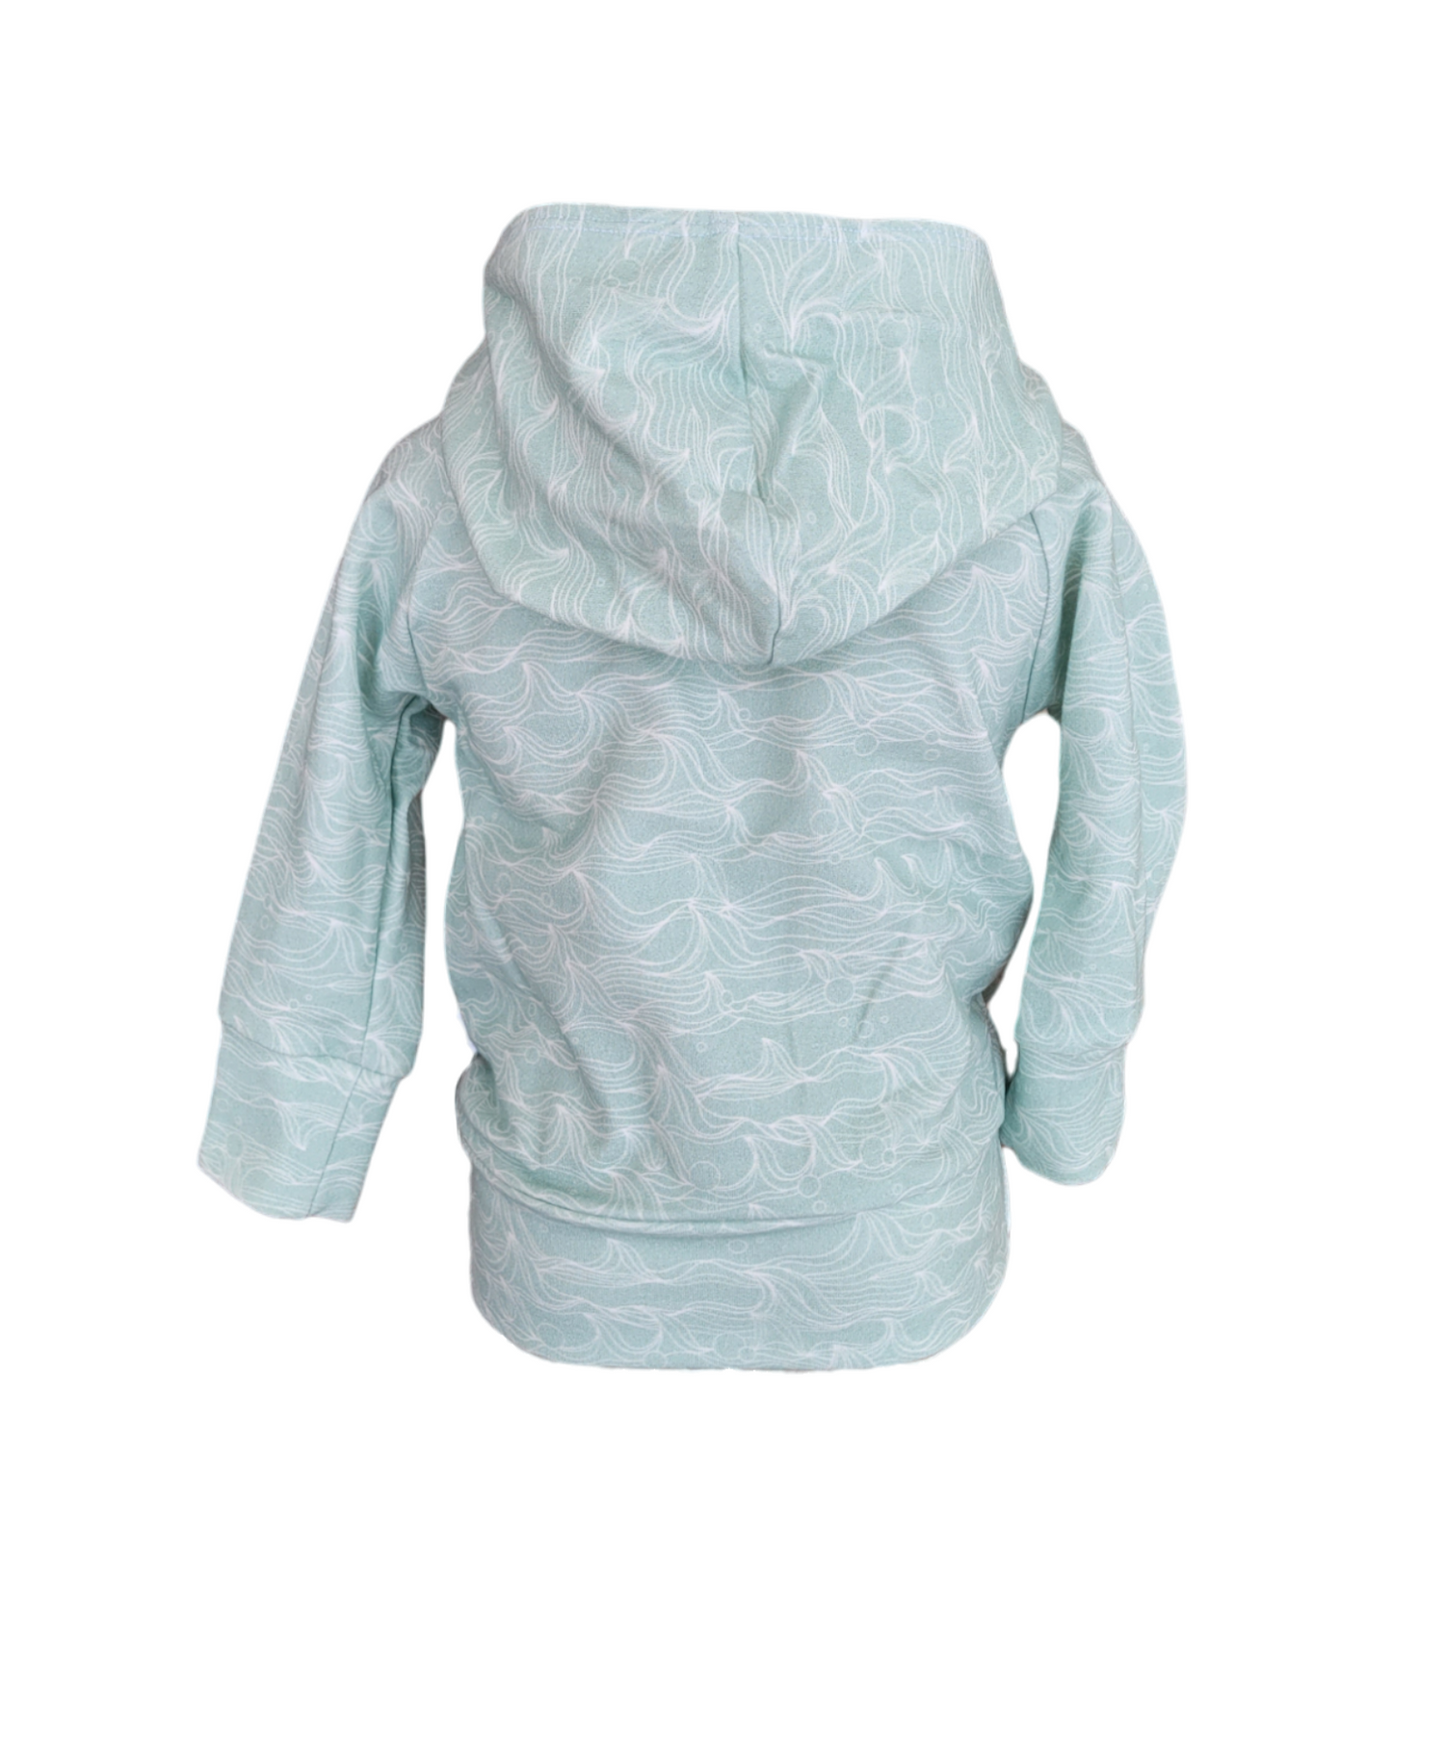 Back of Celestial Waves Hoodie. Organic light green hoodie with white lined waves. 